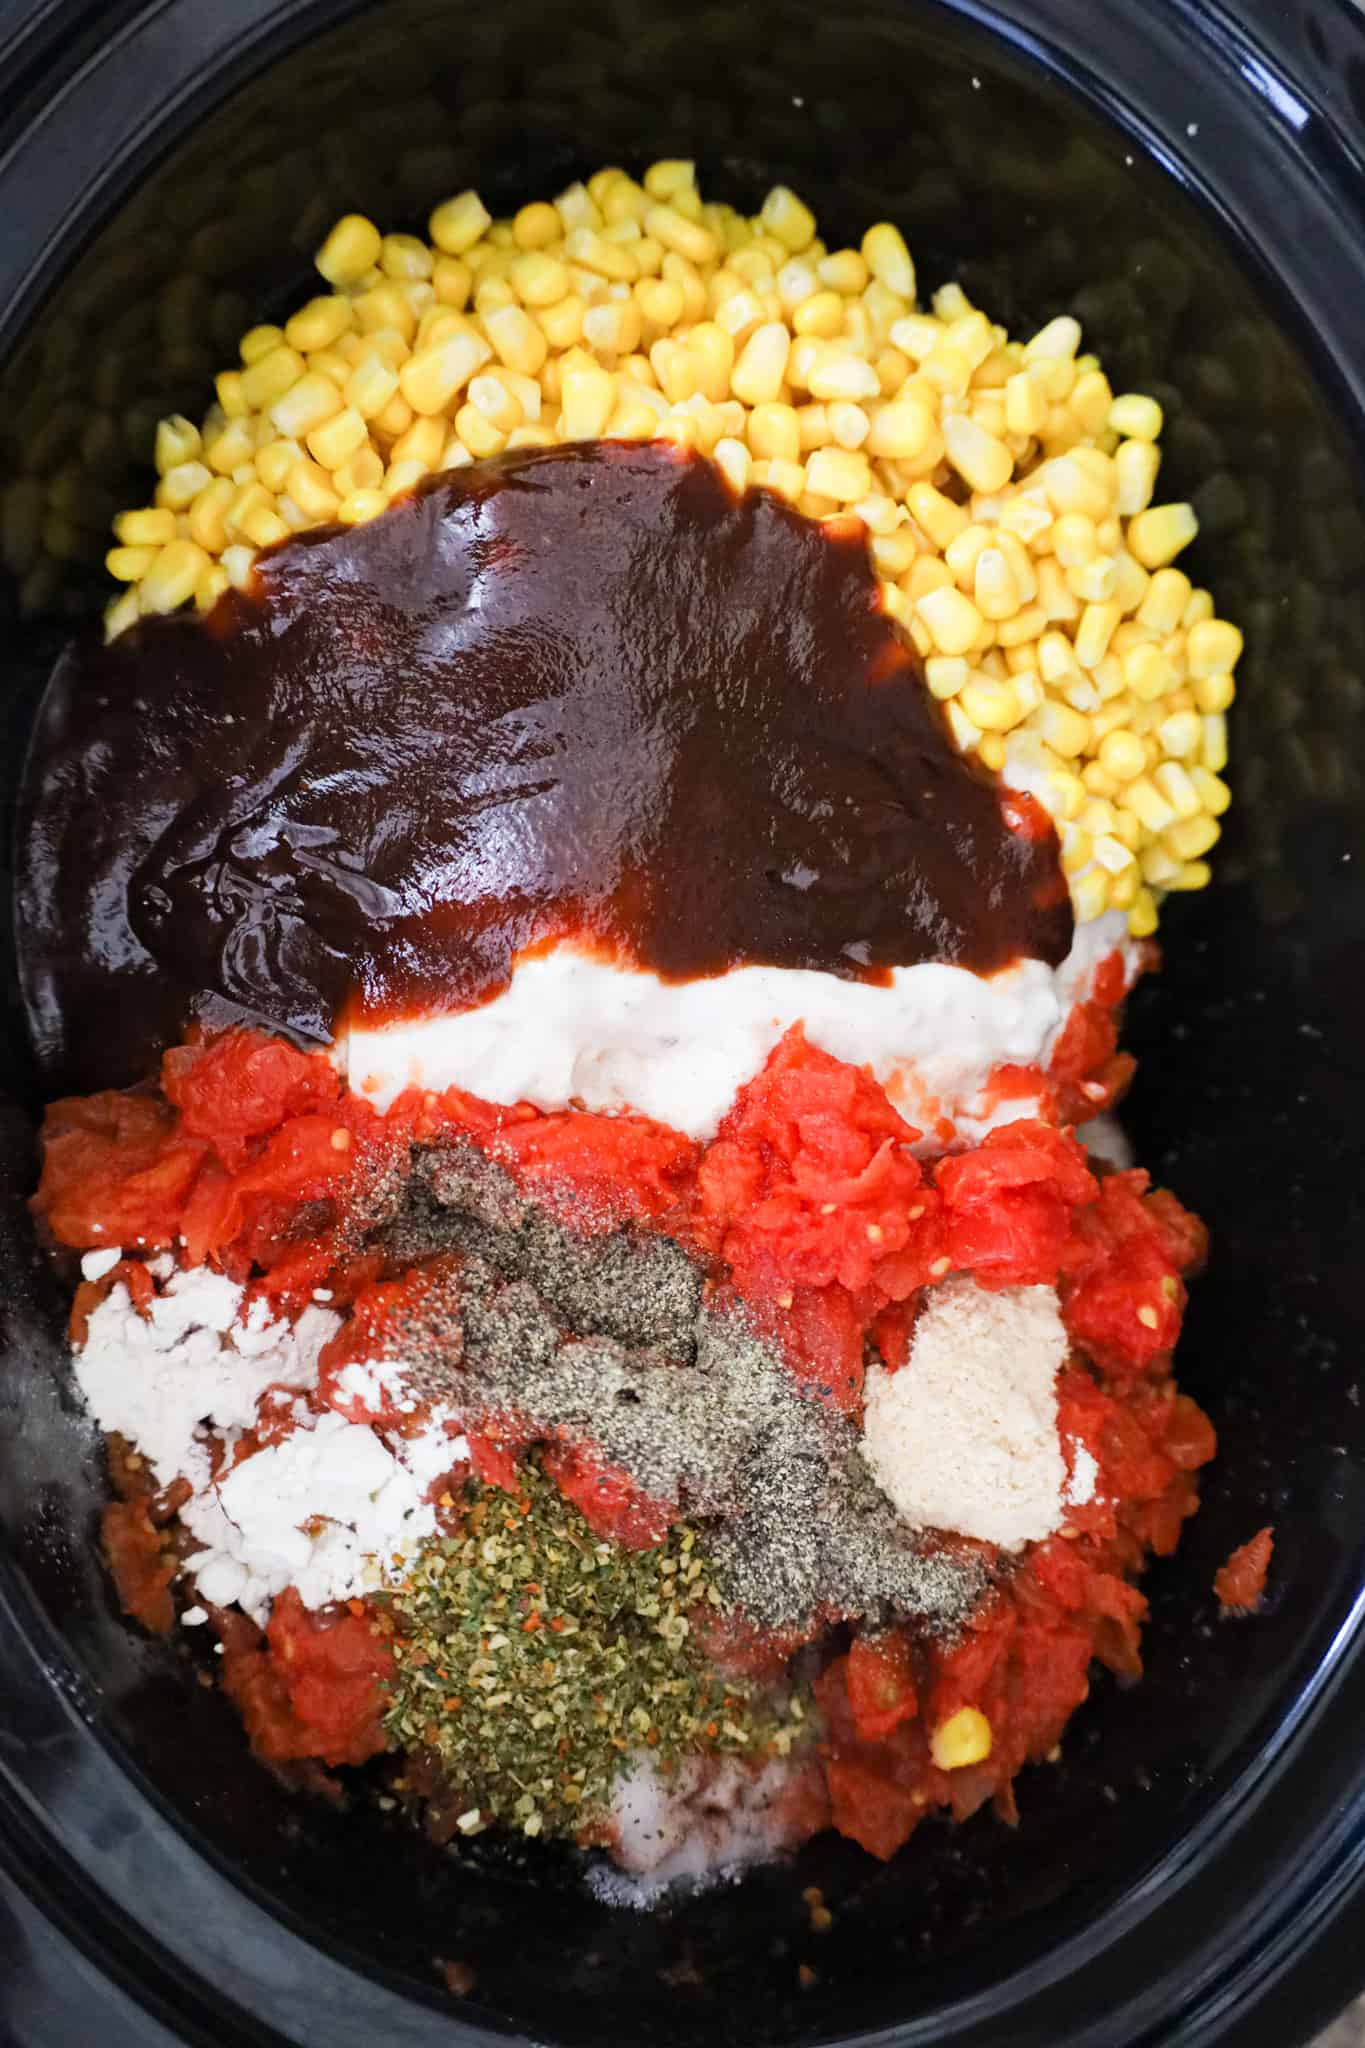 bbq sauce, diced tomatoes, corn and spices in a crock pot